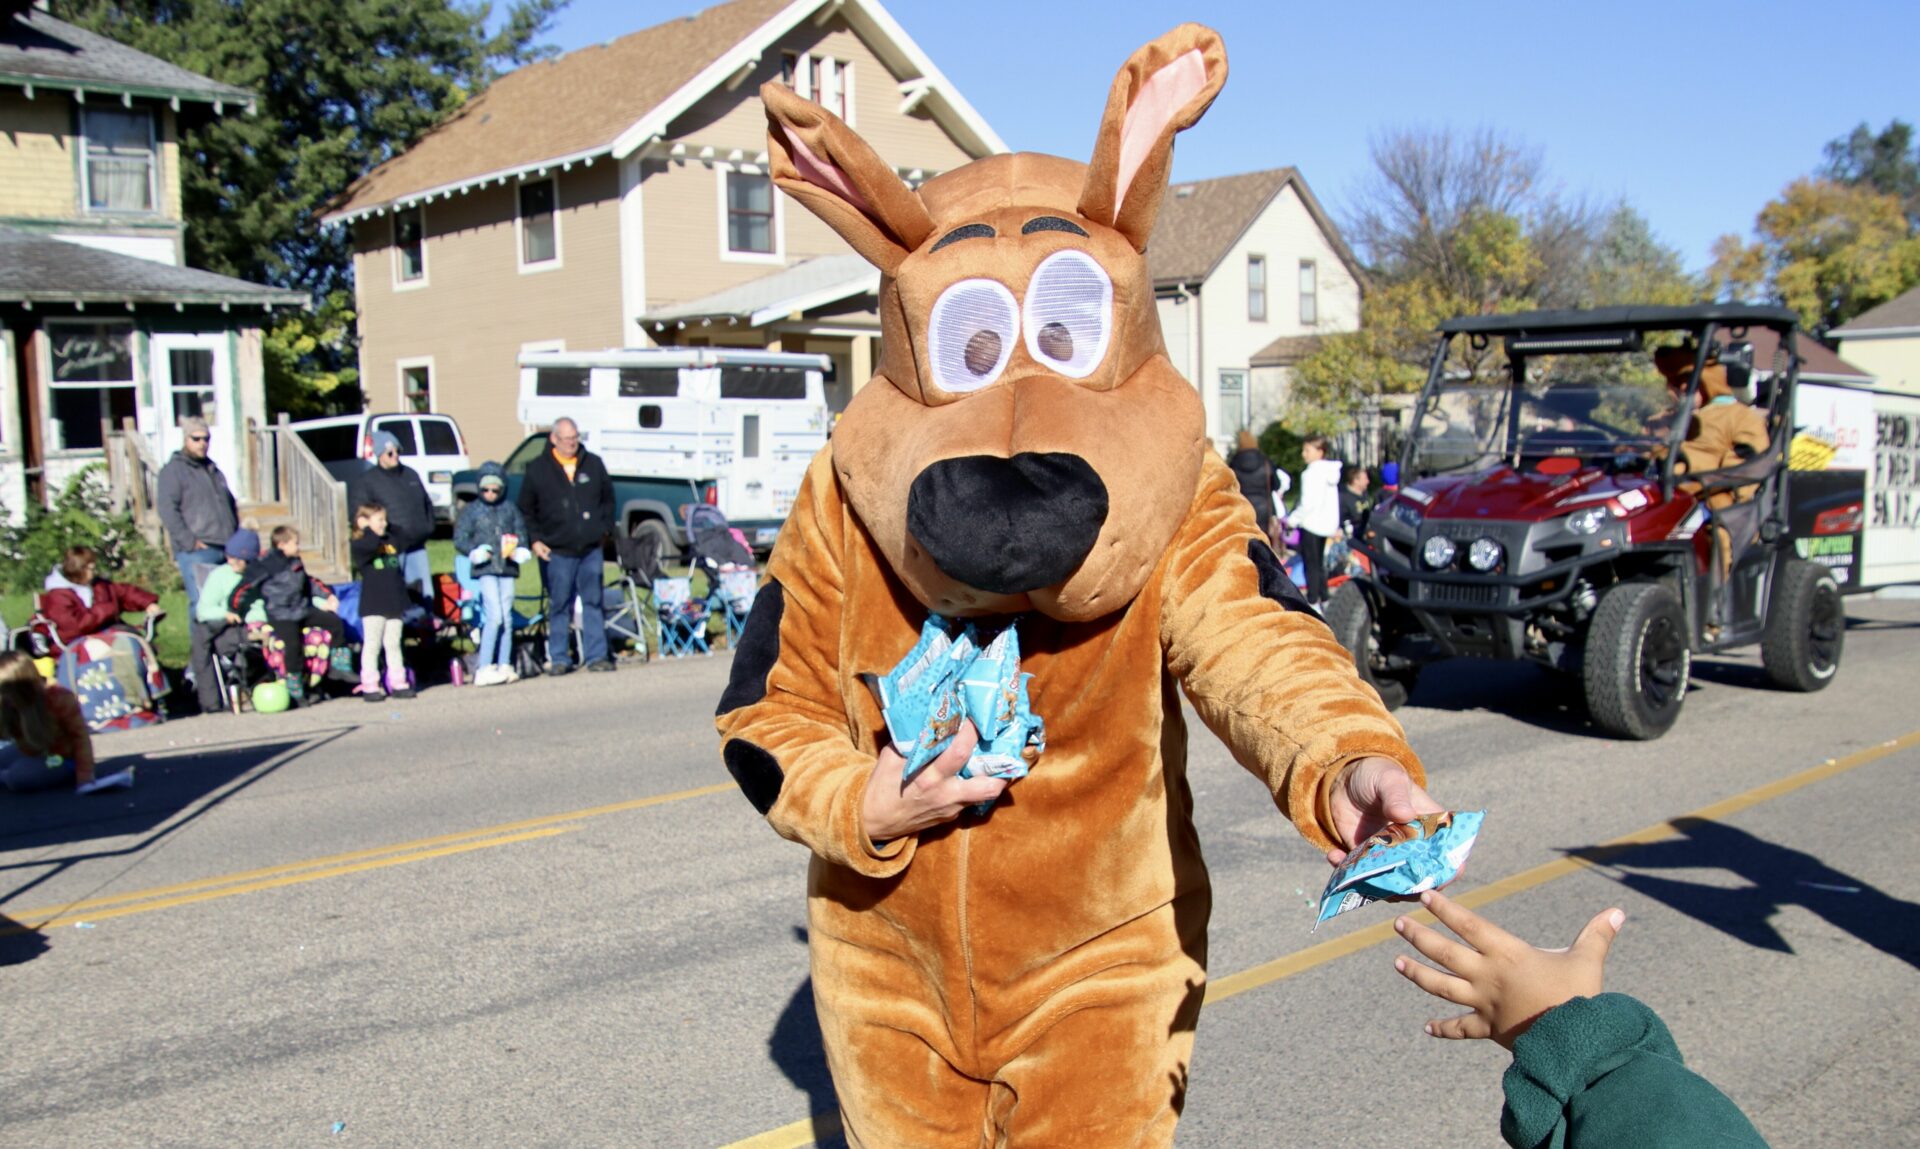 Scooby-Doo usually seeks snacks, but he was handing them out during the Northern State homecoming parade on Saturday, Oct. 7. Aberdeen Insider photo by Scott Waltman